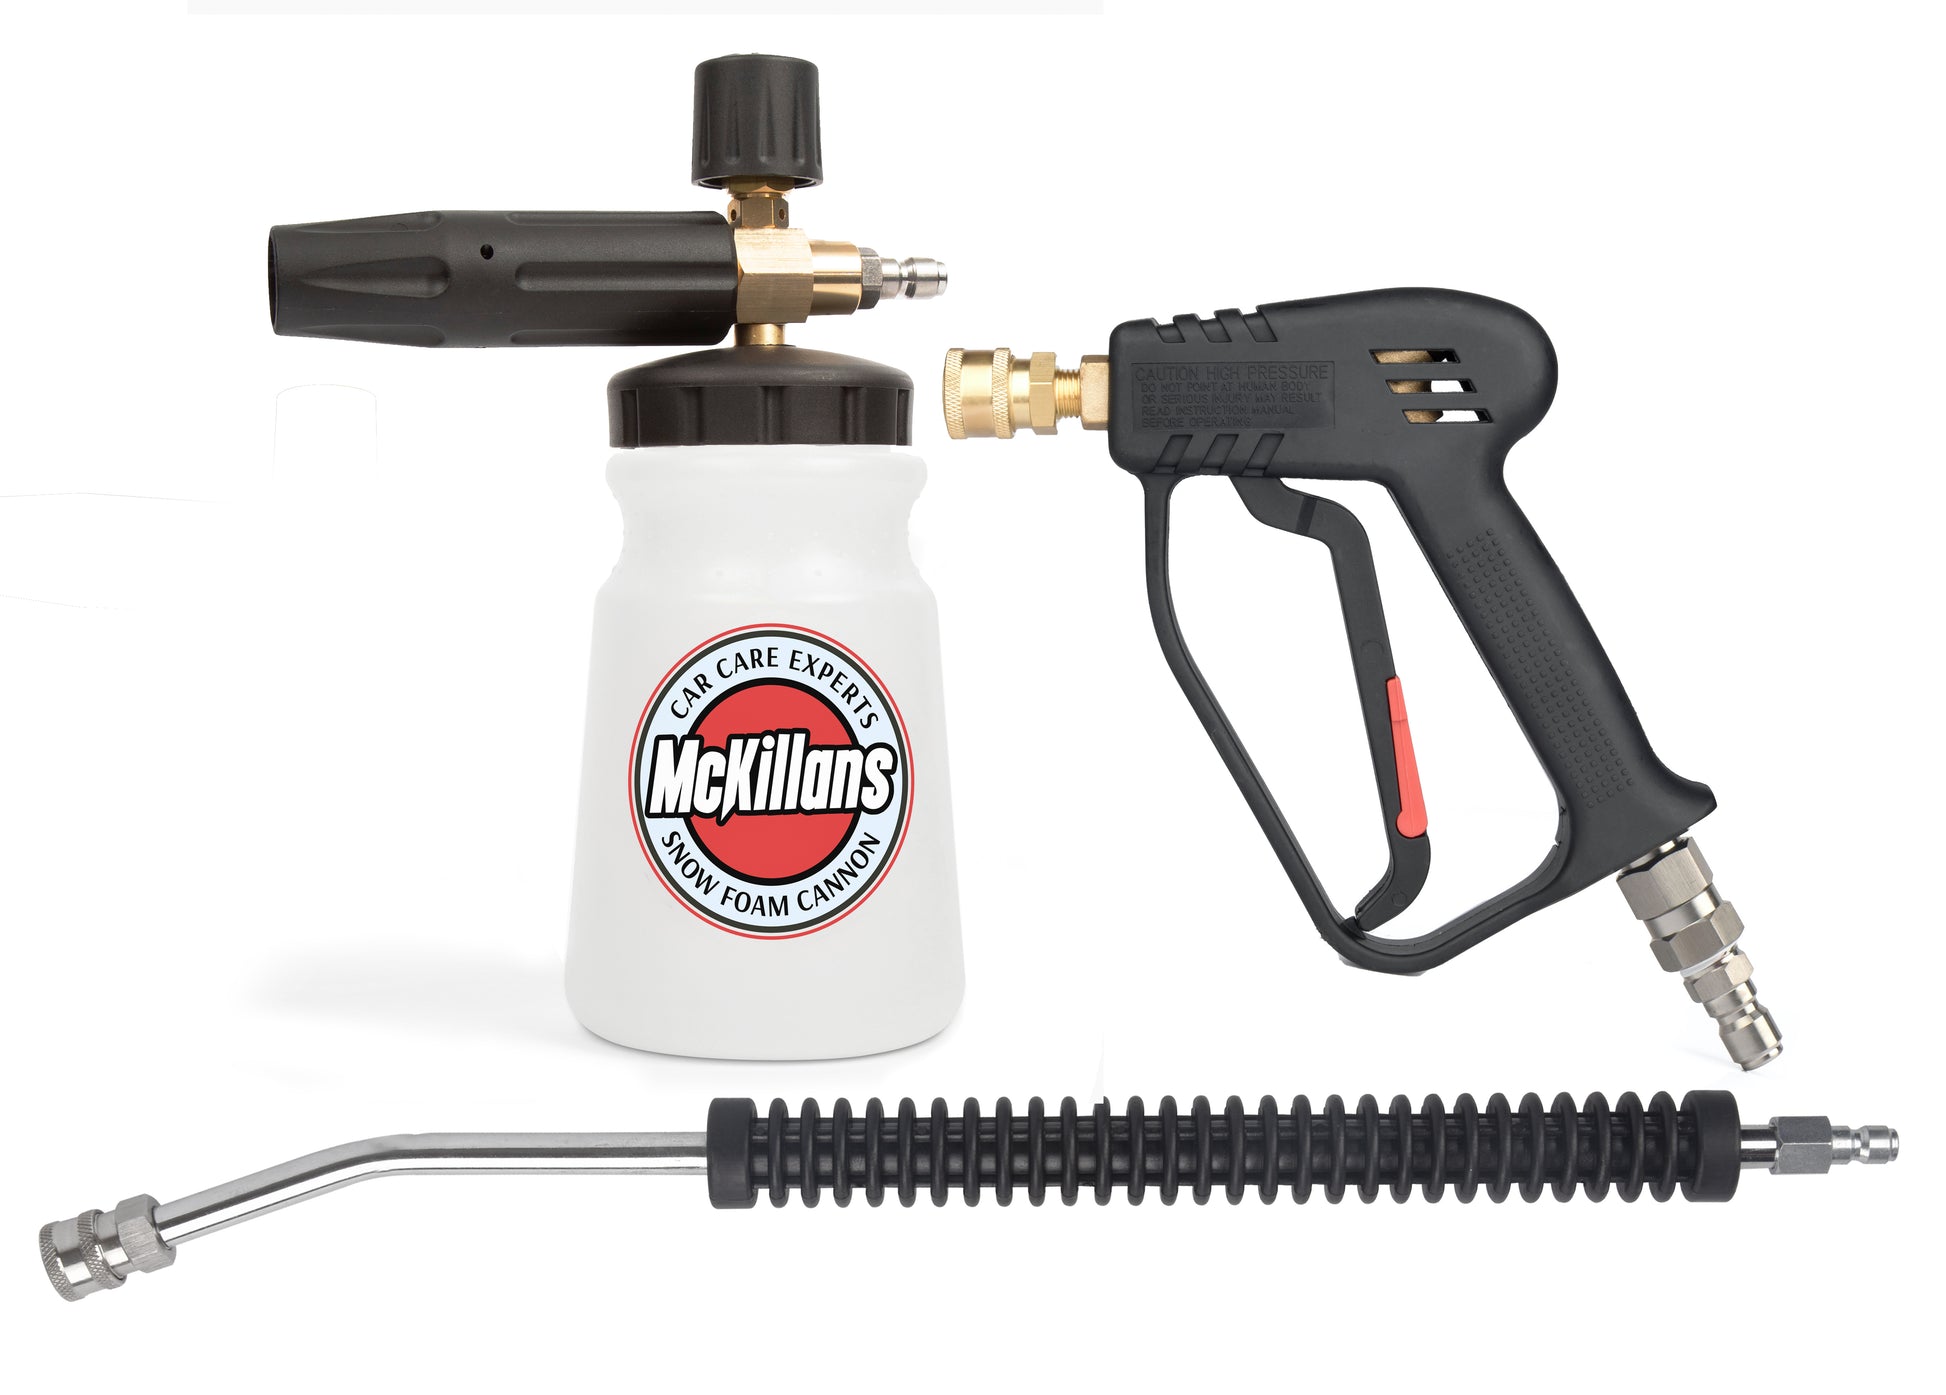 Blackline High-Performance Foam Cannon for Pressure Washer Carbon